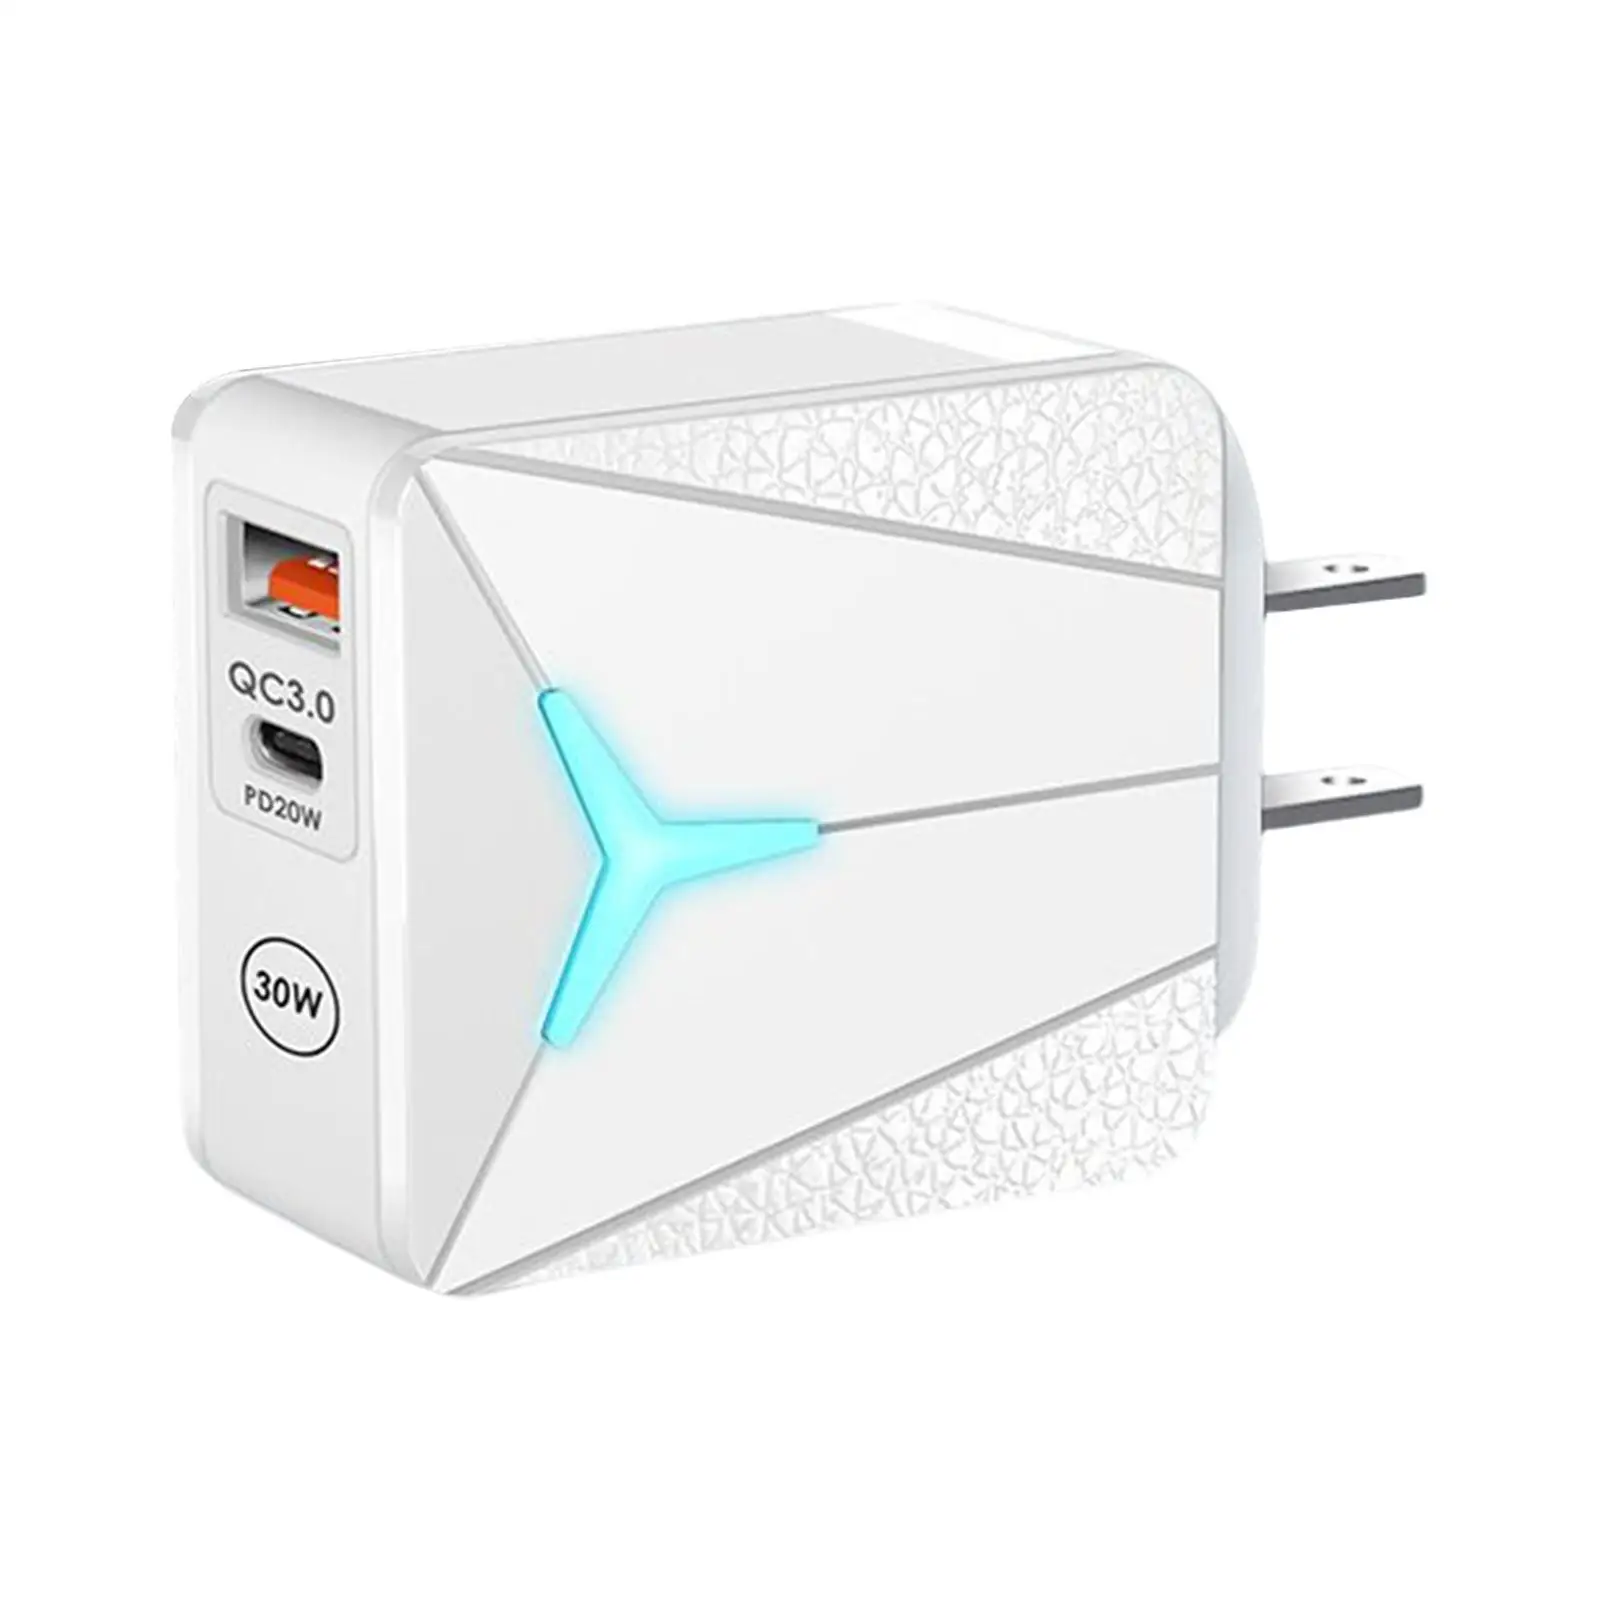 Phone Charger Adapter Compact Fast Charging 5V / 4A 9V / 2.4A 12V / 1.8A Dual Port Converter USB Wall Charger for Home Use White